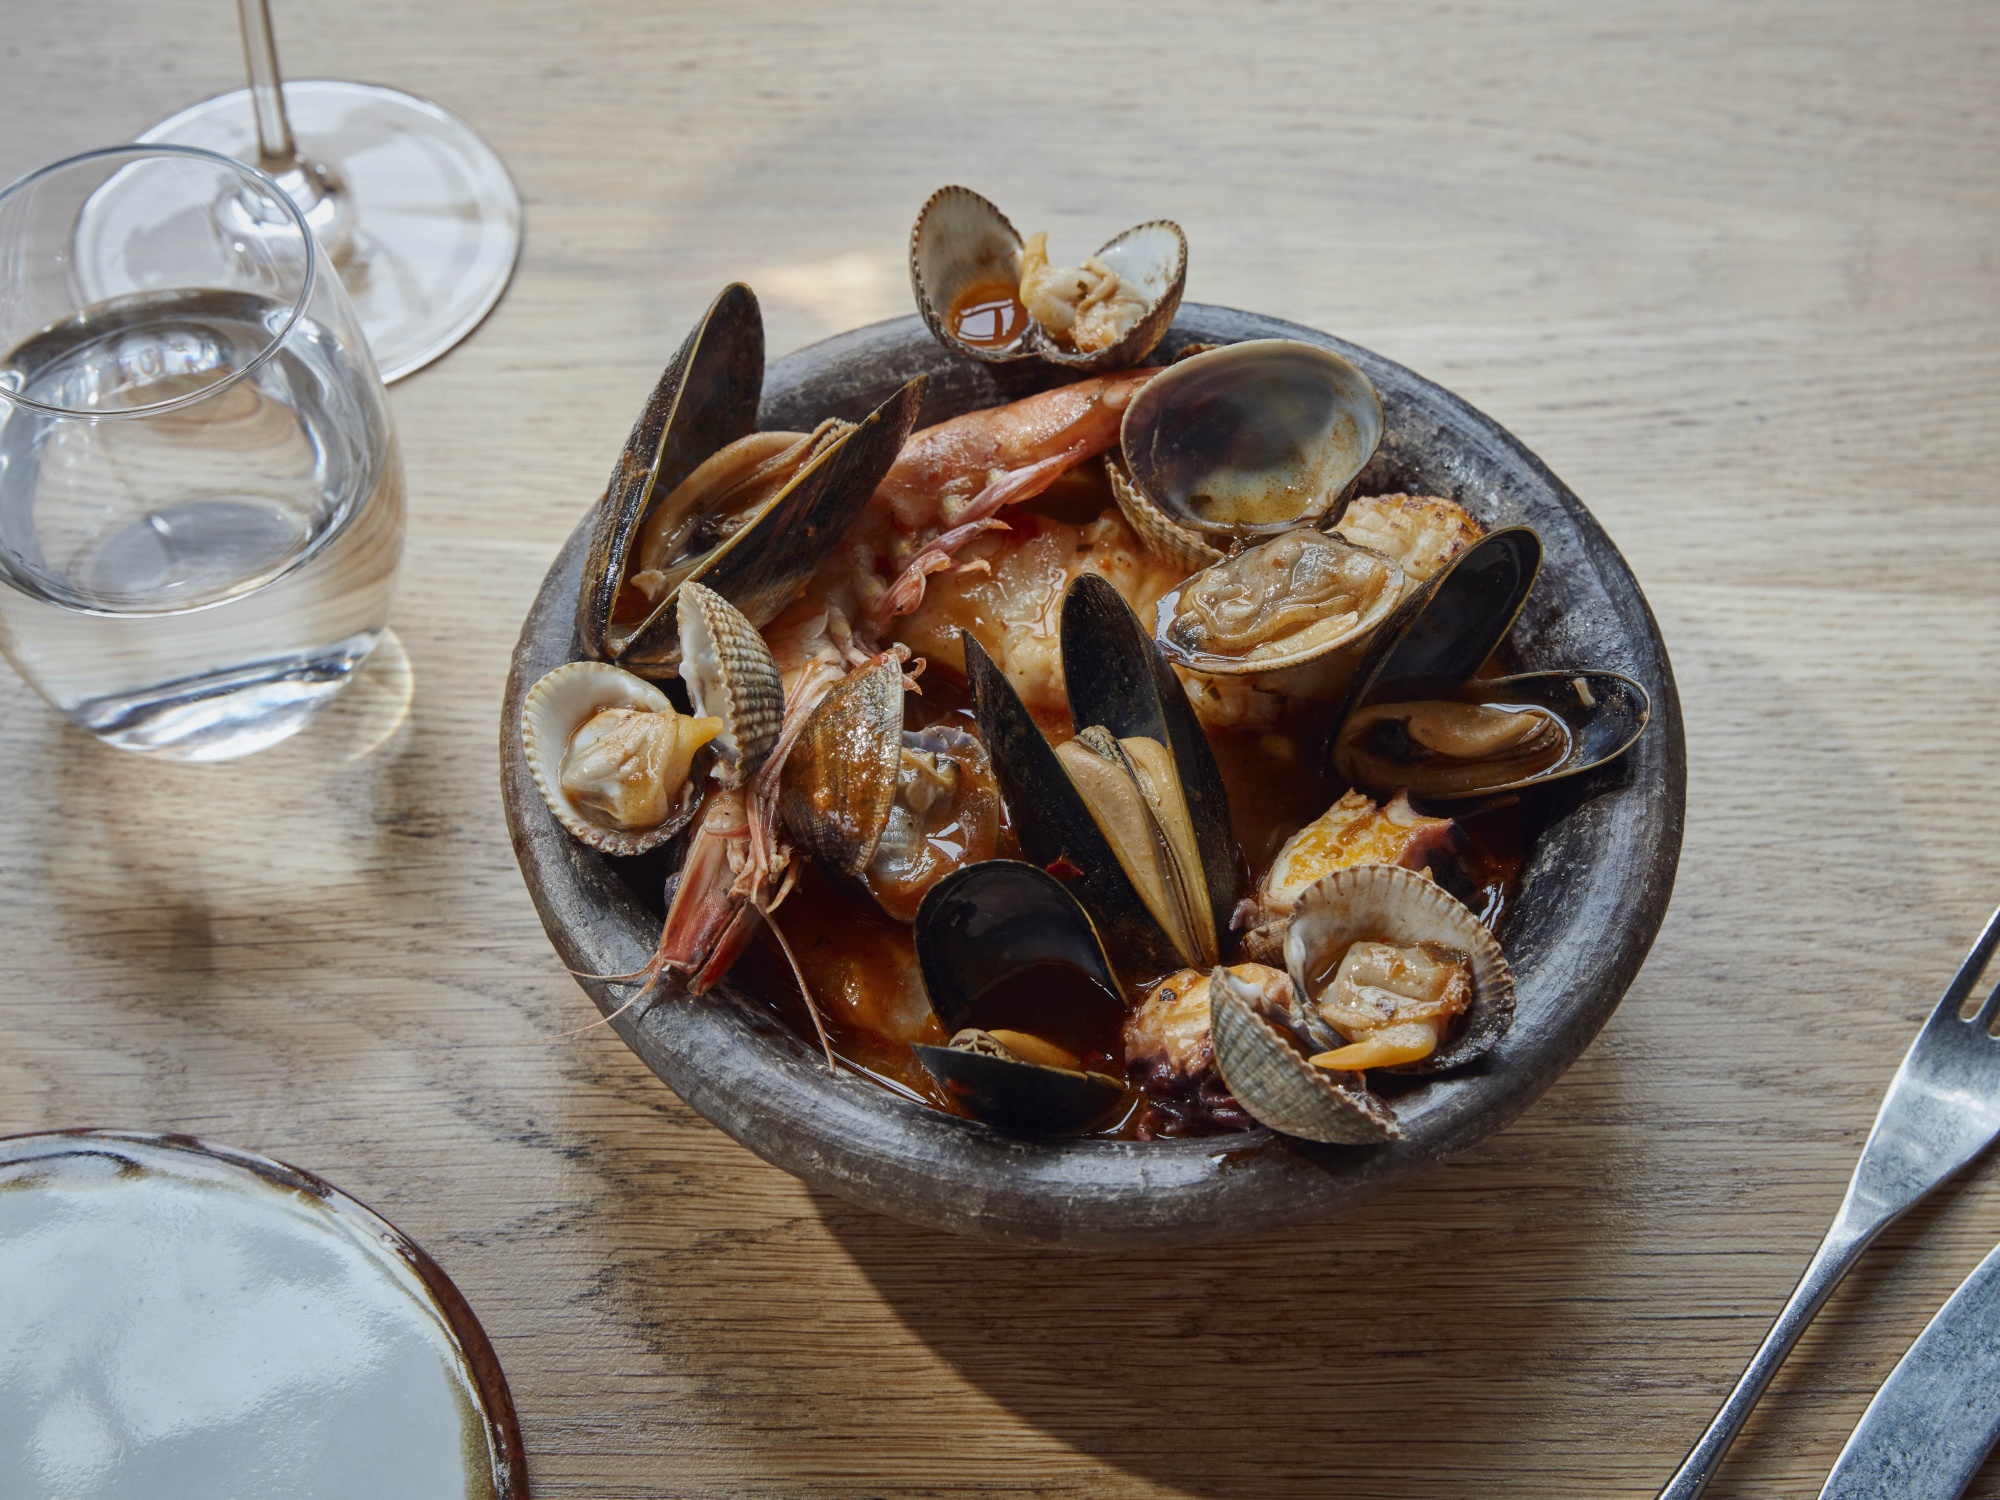 Steamed Mussels Provencal by Chef Jean Pierre